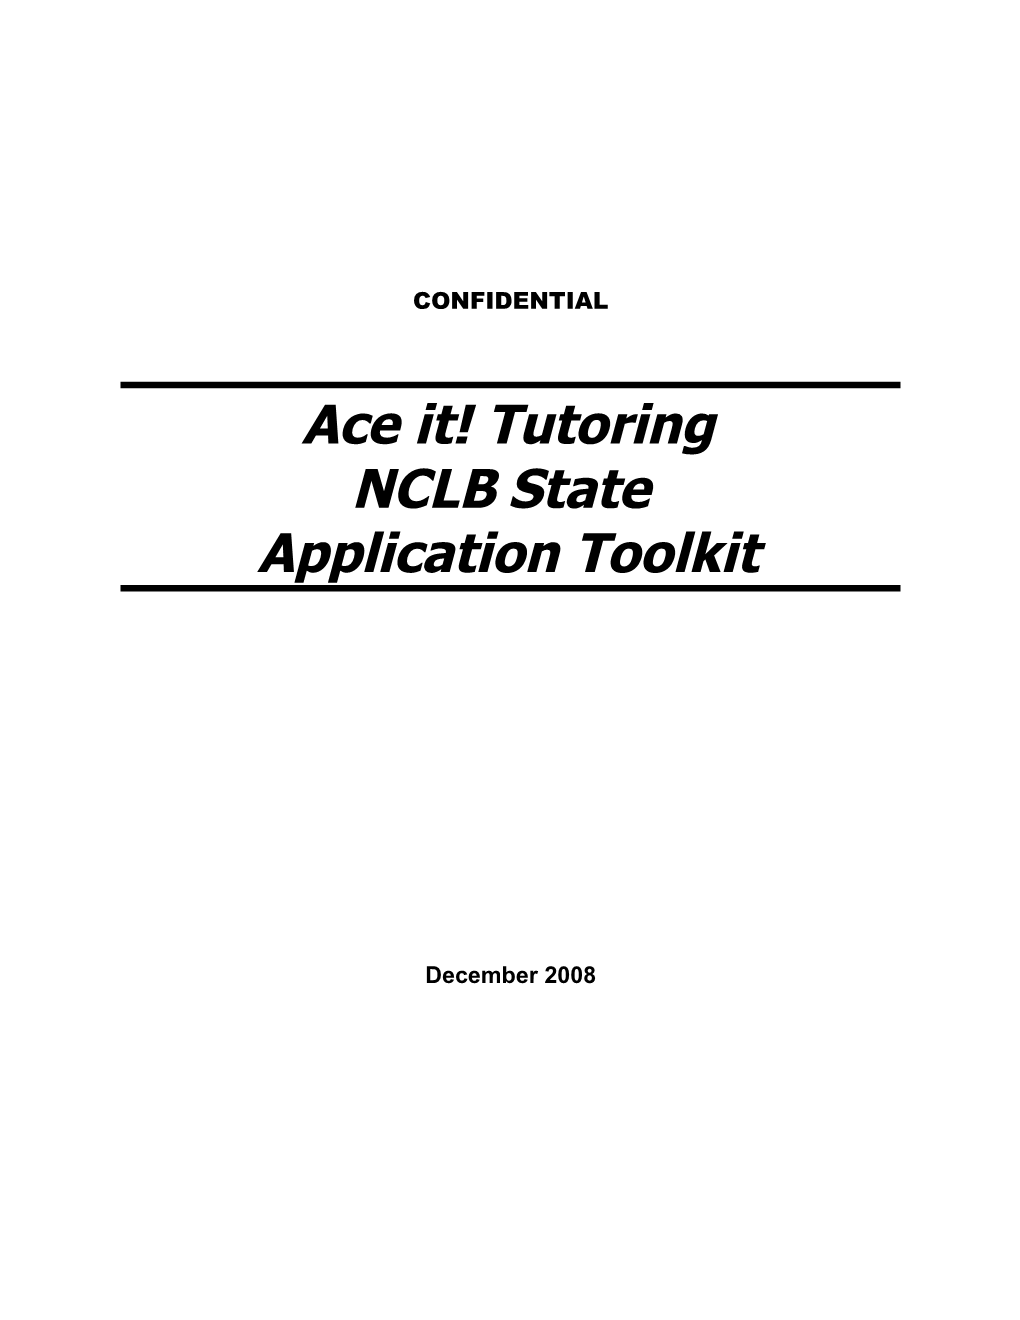 Ace It! Tutoring Nclbstate Application Toolkit